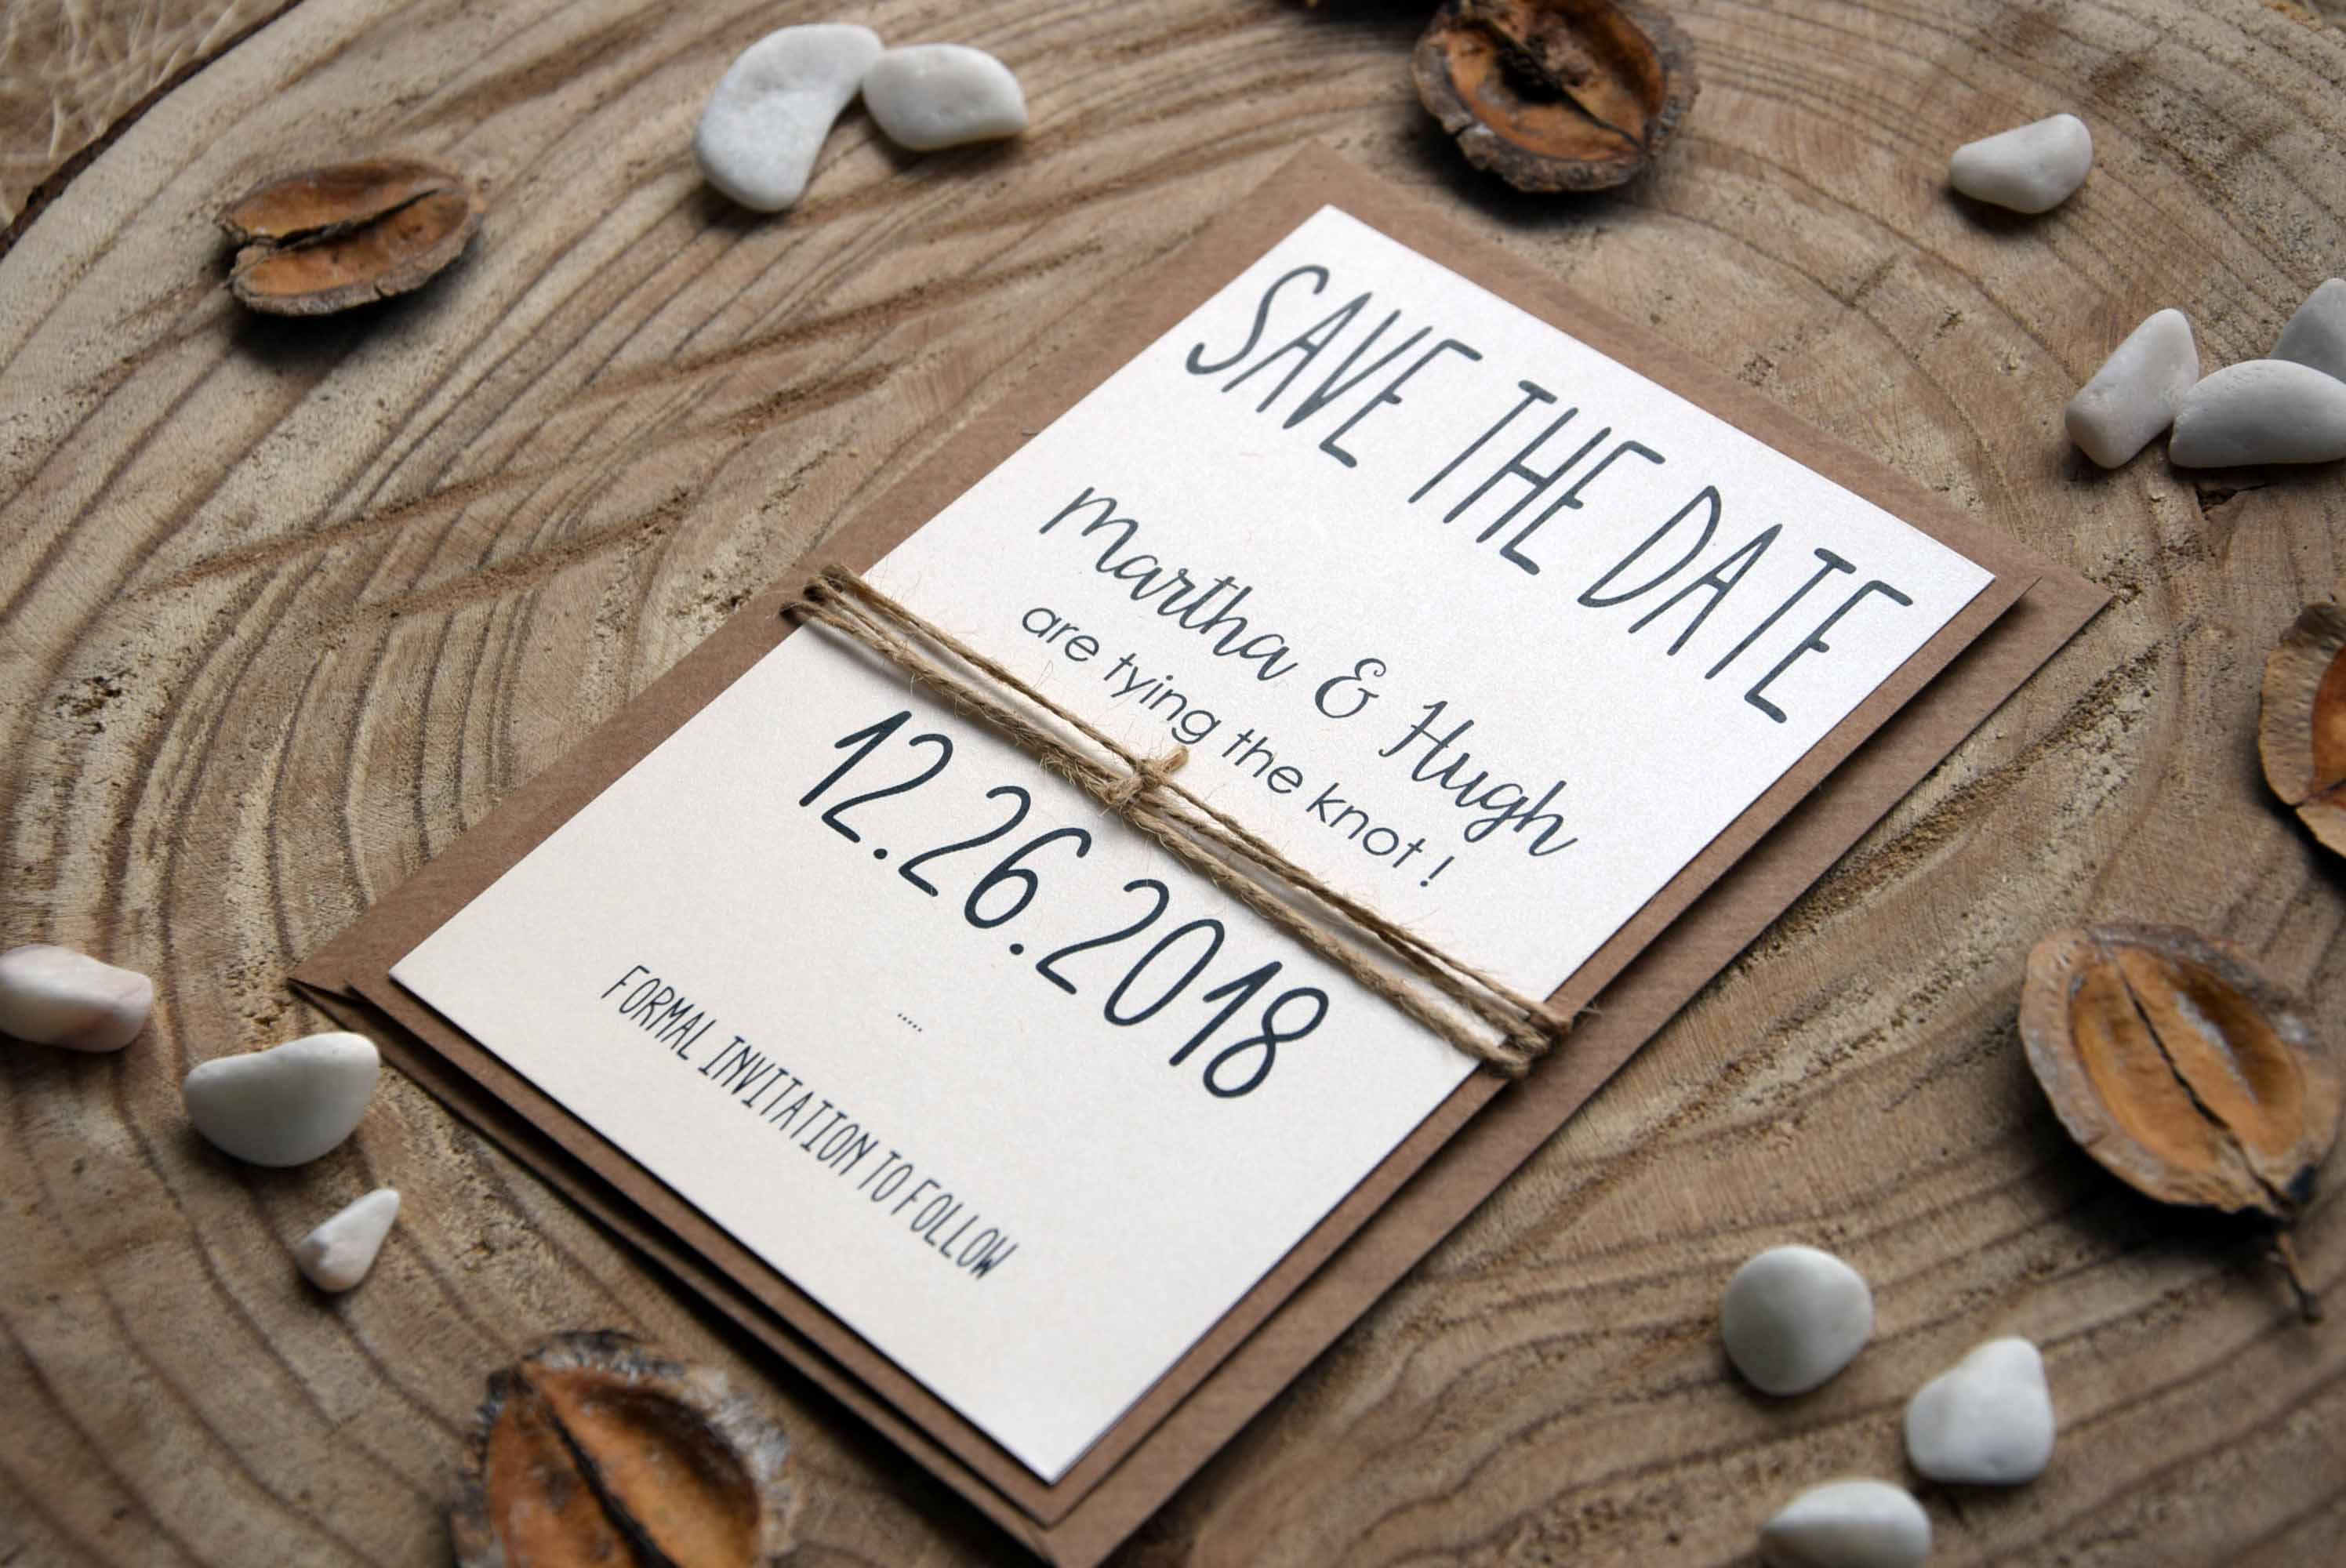 Tying The Knot Save the Date Cards, Simple Wedding Save The Dates